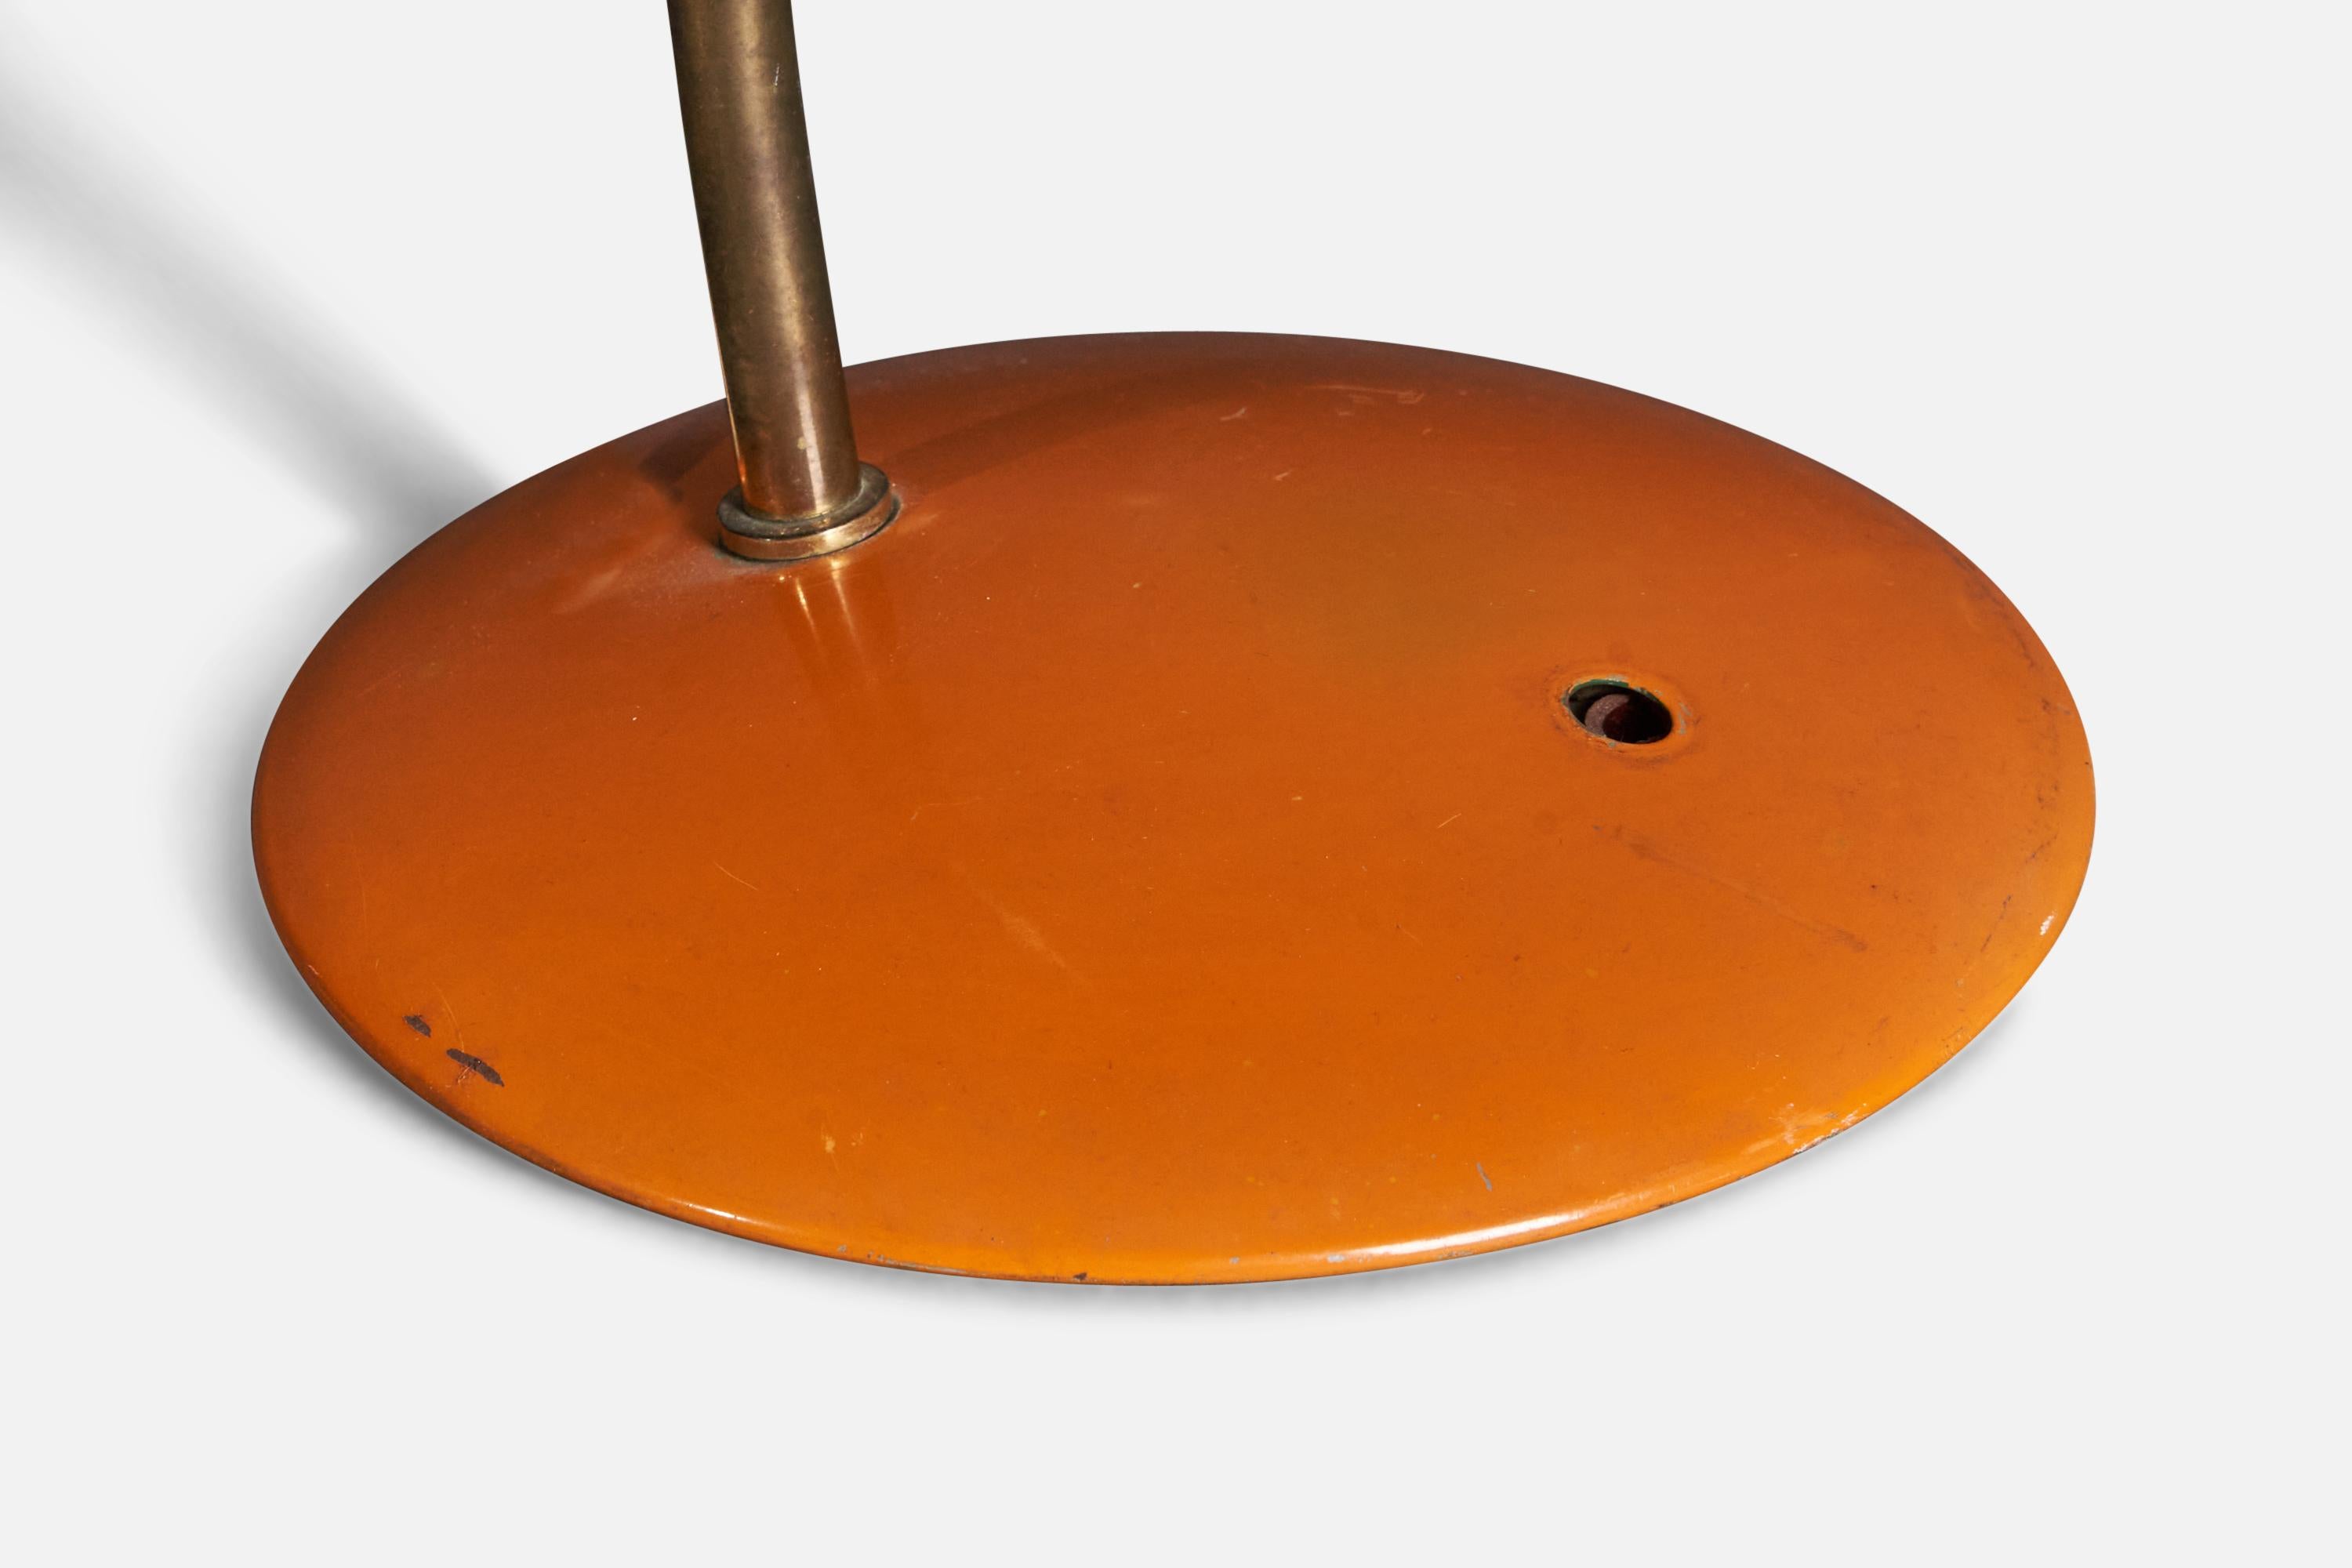 Bauhaus Christian Dell, Table Lamp, Brass, Orange-Lacquered Metal, Germany, 1950s For Sale